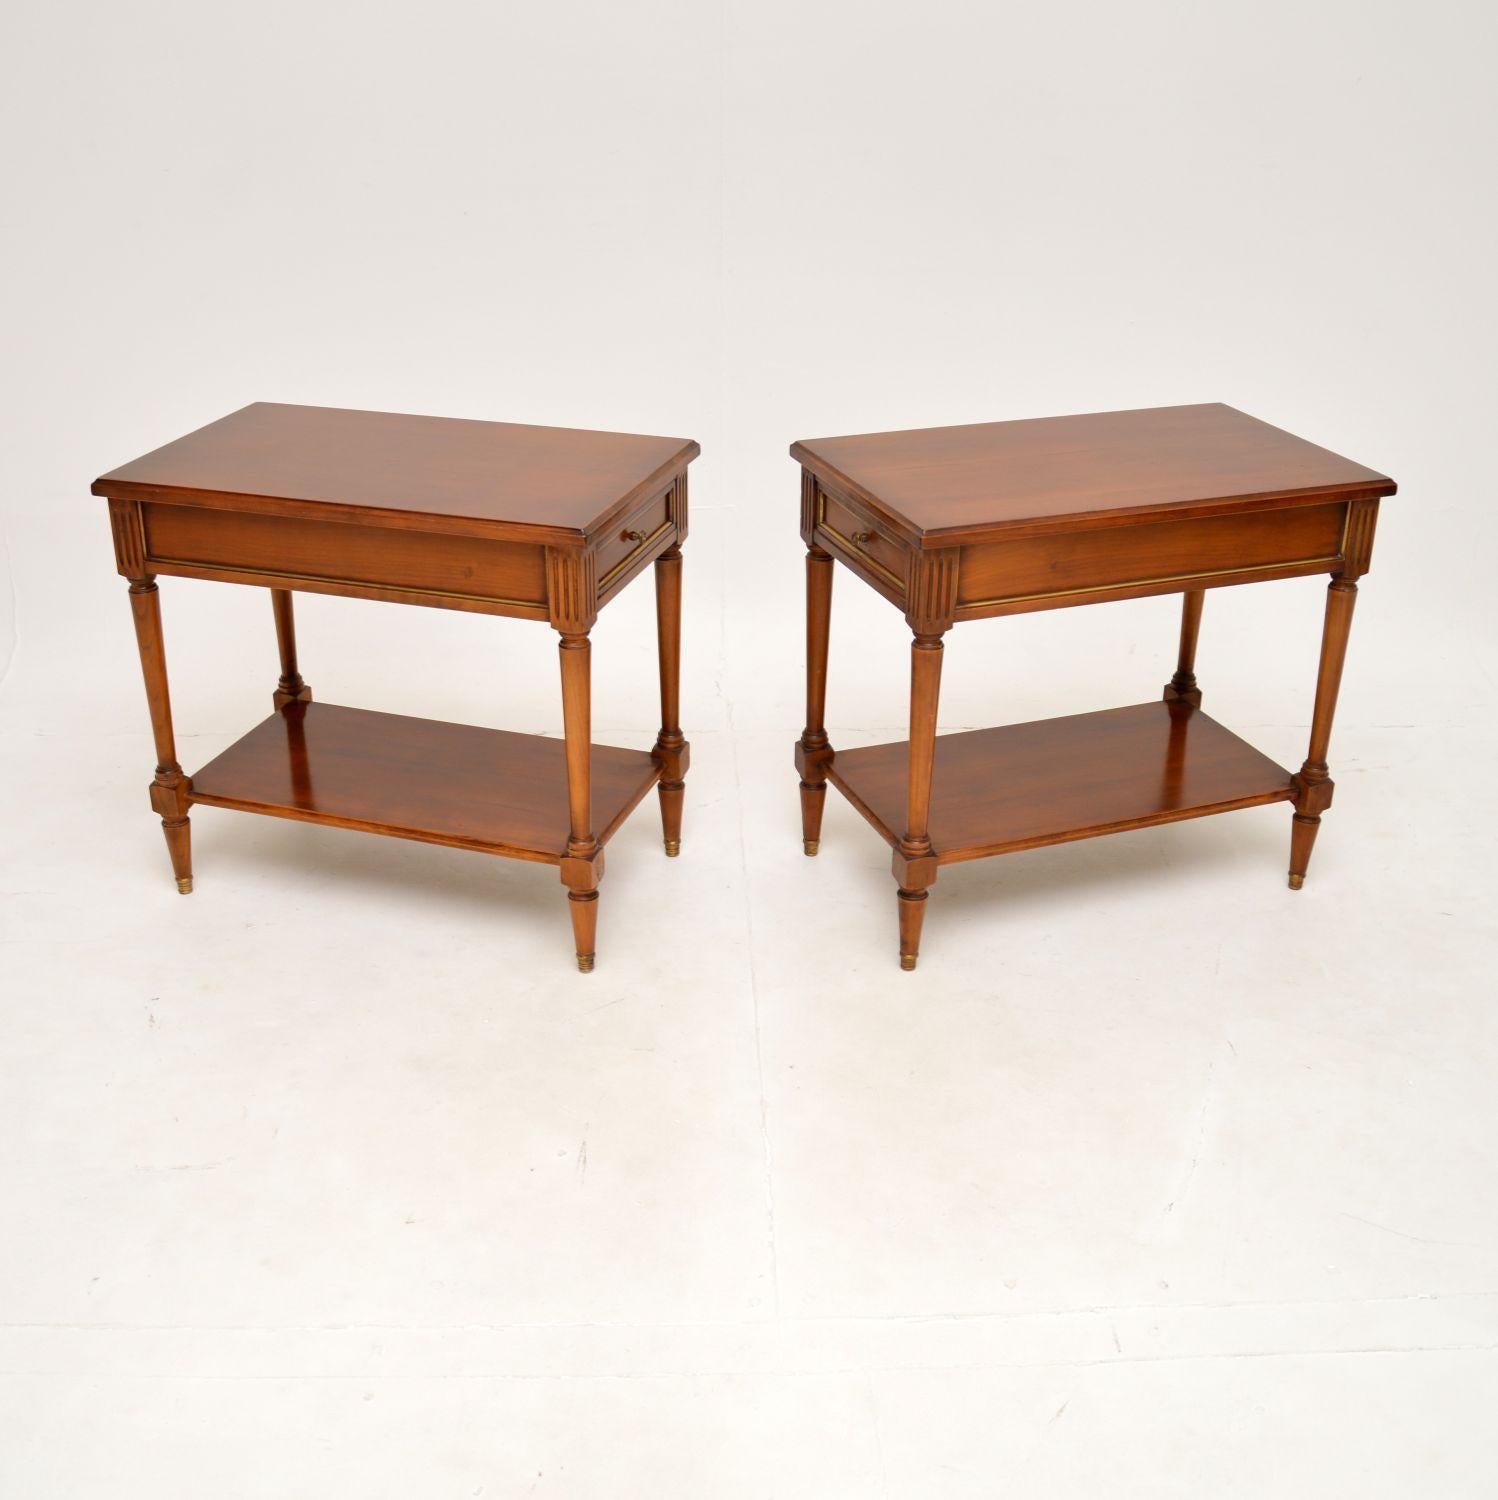 British Pair of Antique Georgian Style Walnut Side Tables